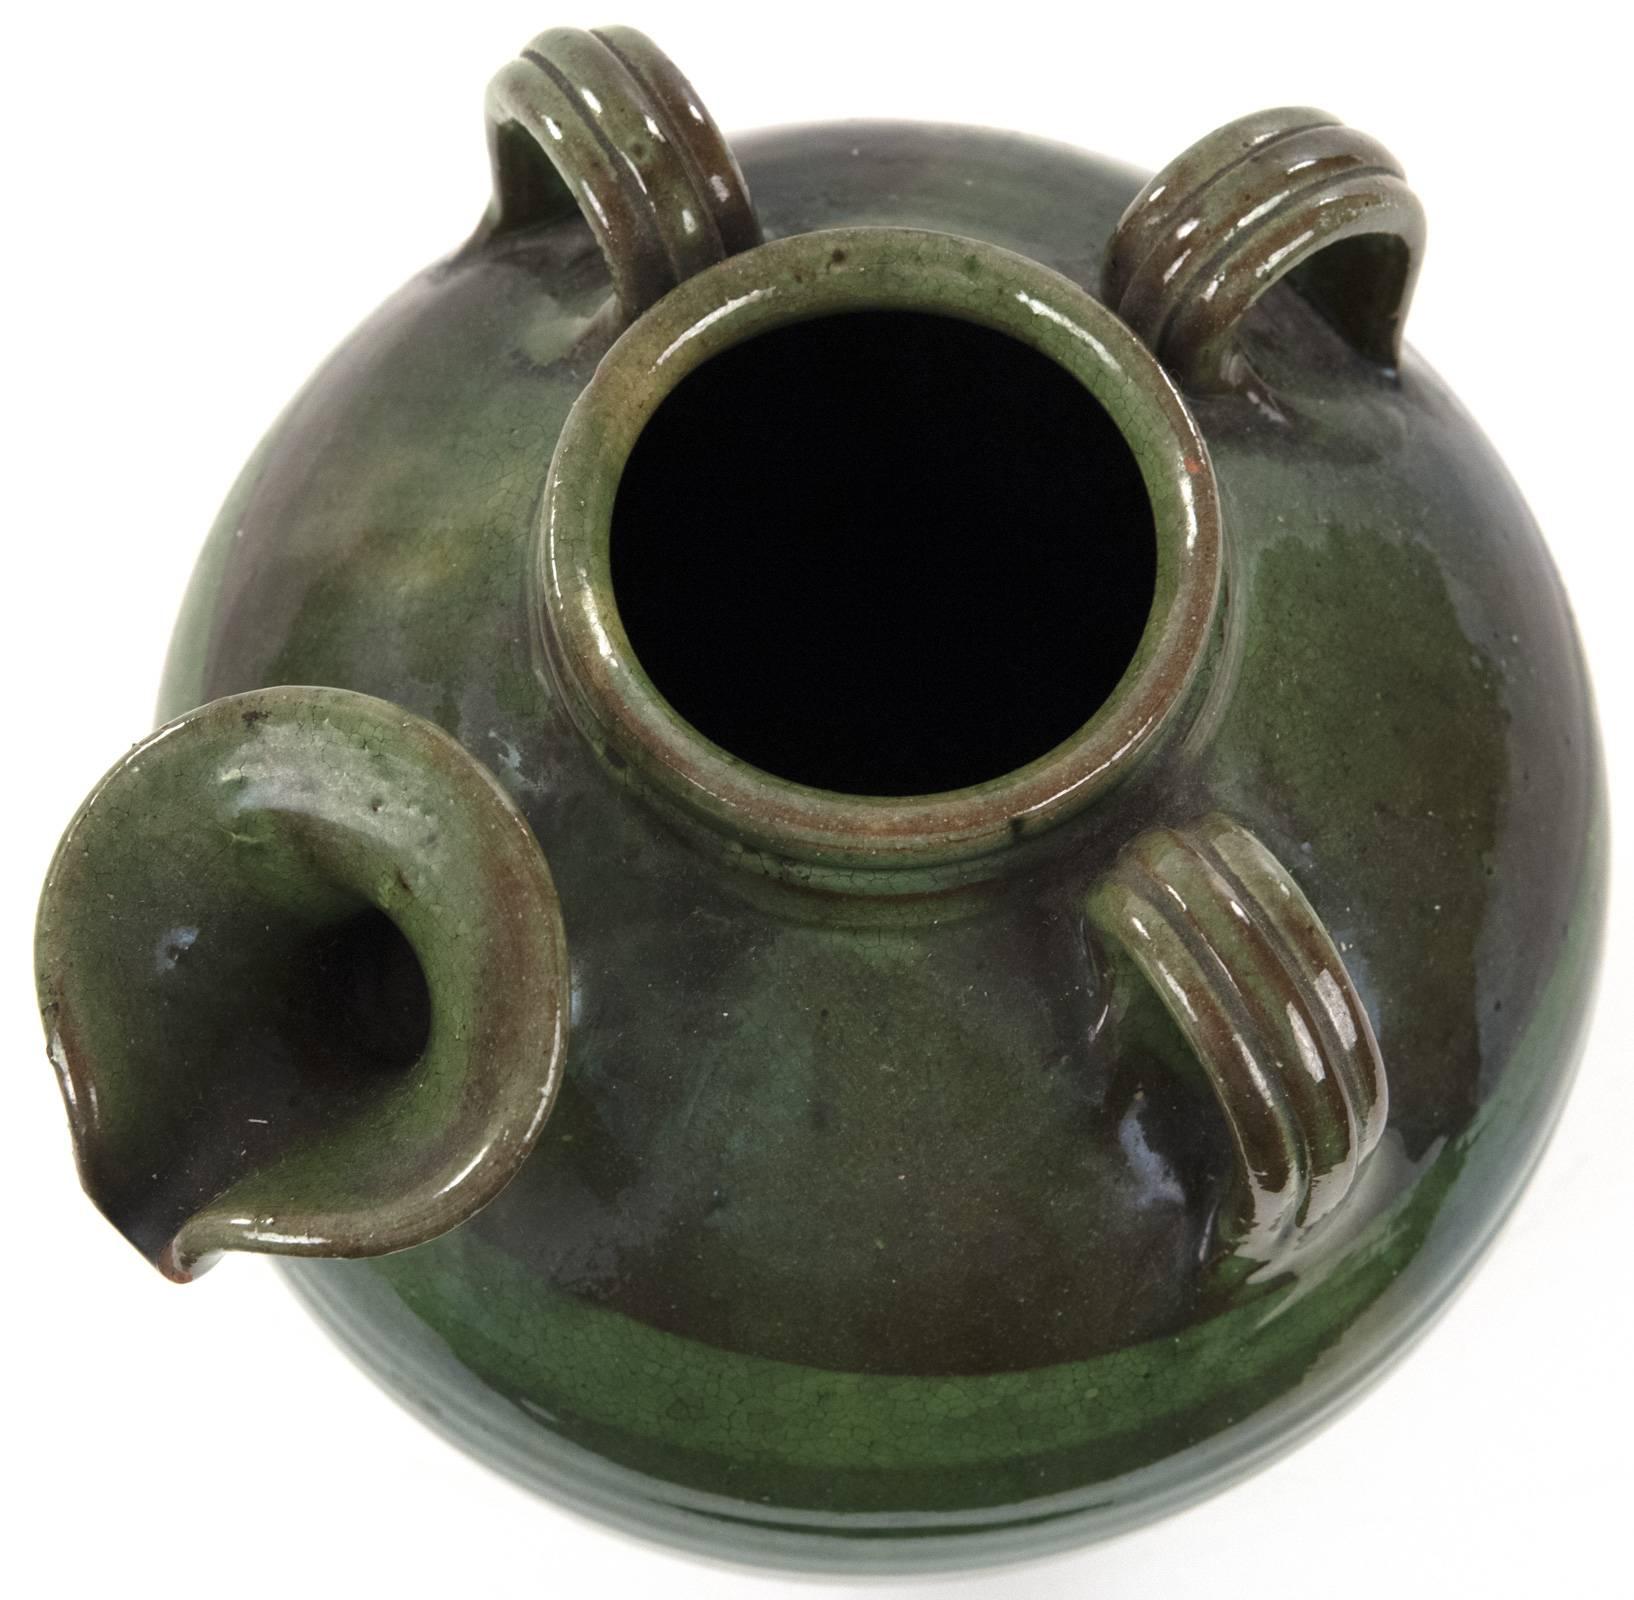 A green glazed jug of baluster form with three incised handles affixed from neck to shoulder, with a shaped pinched spout. Measures: 9 ¾ x 8 inches.